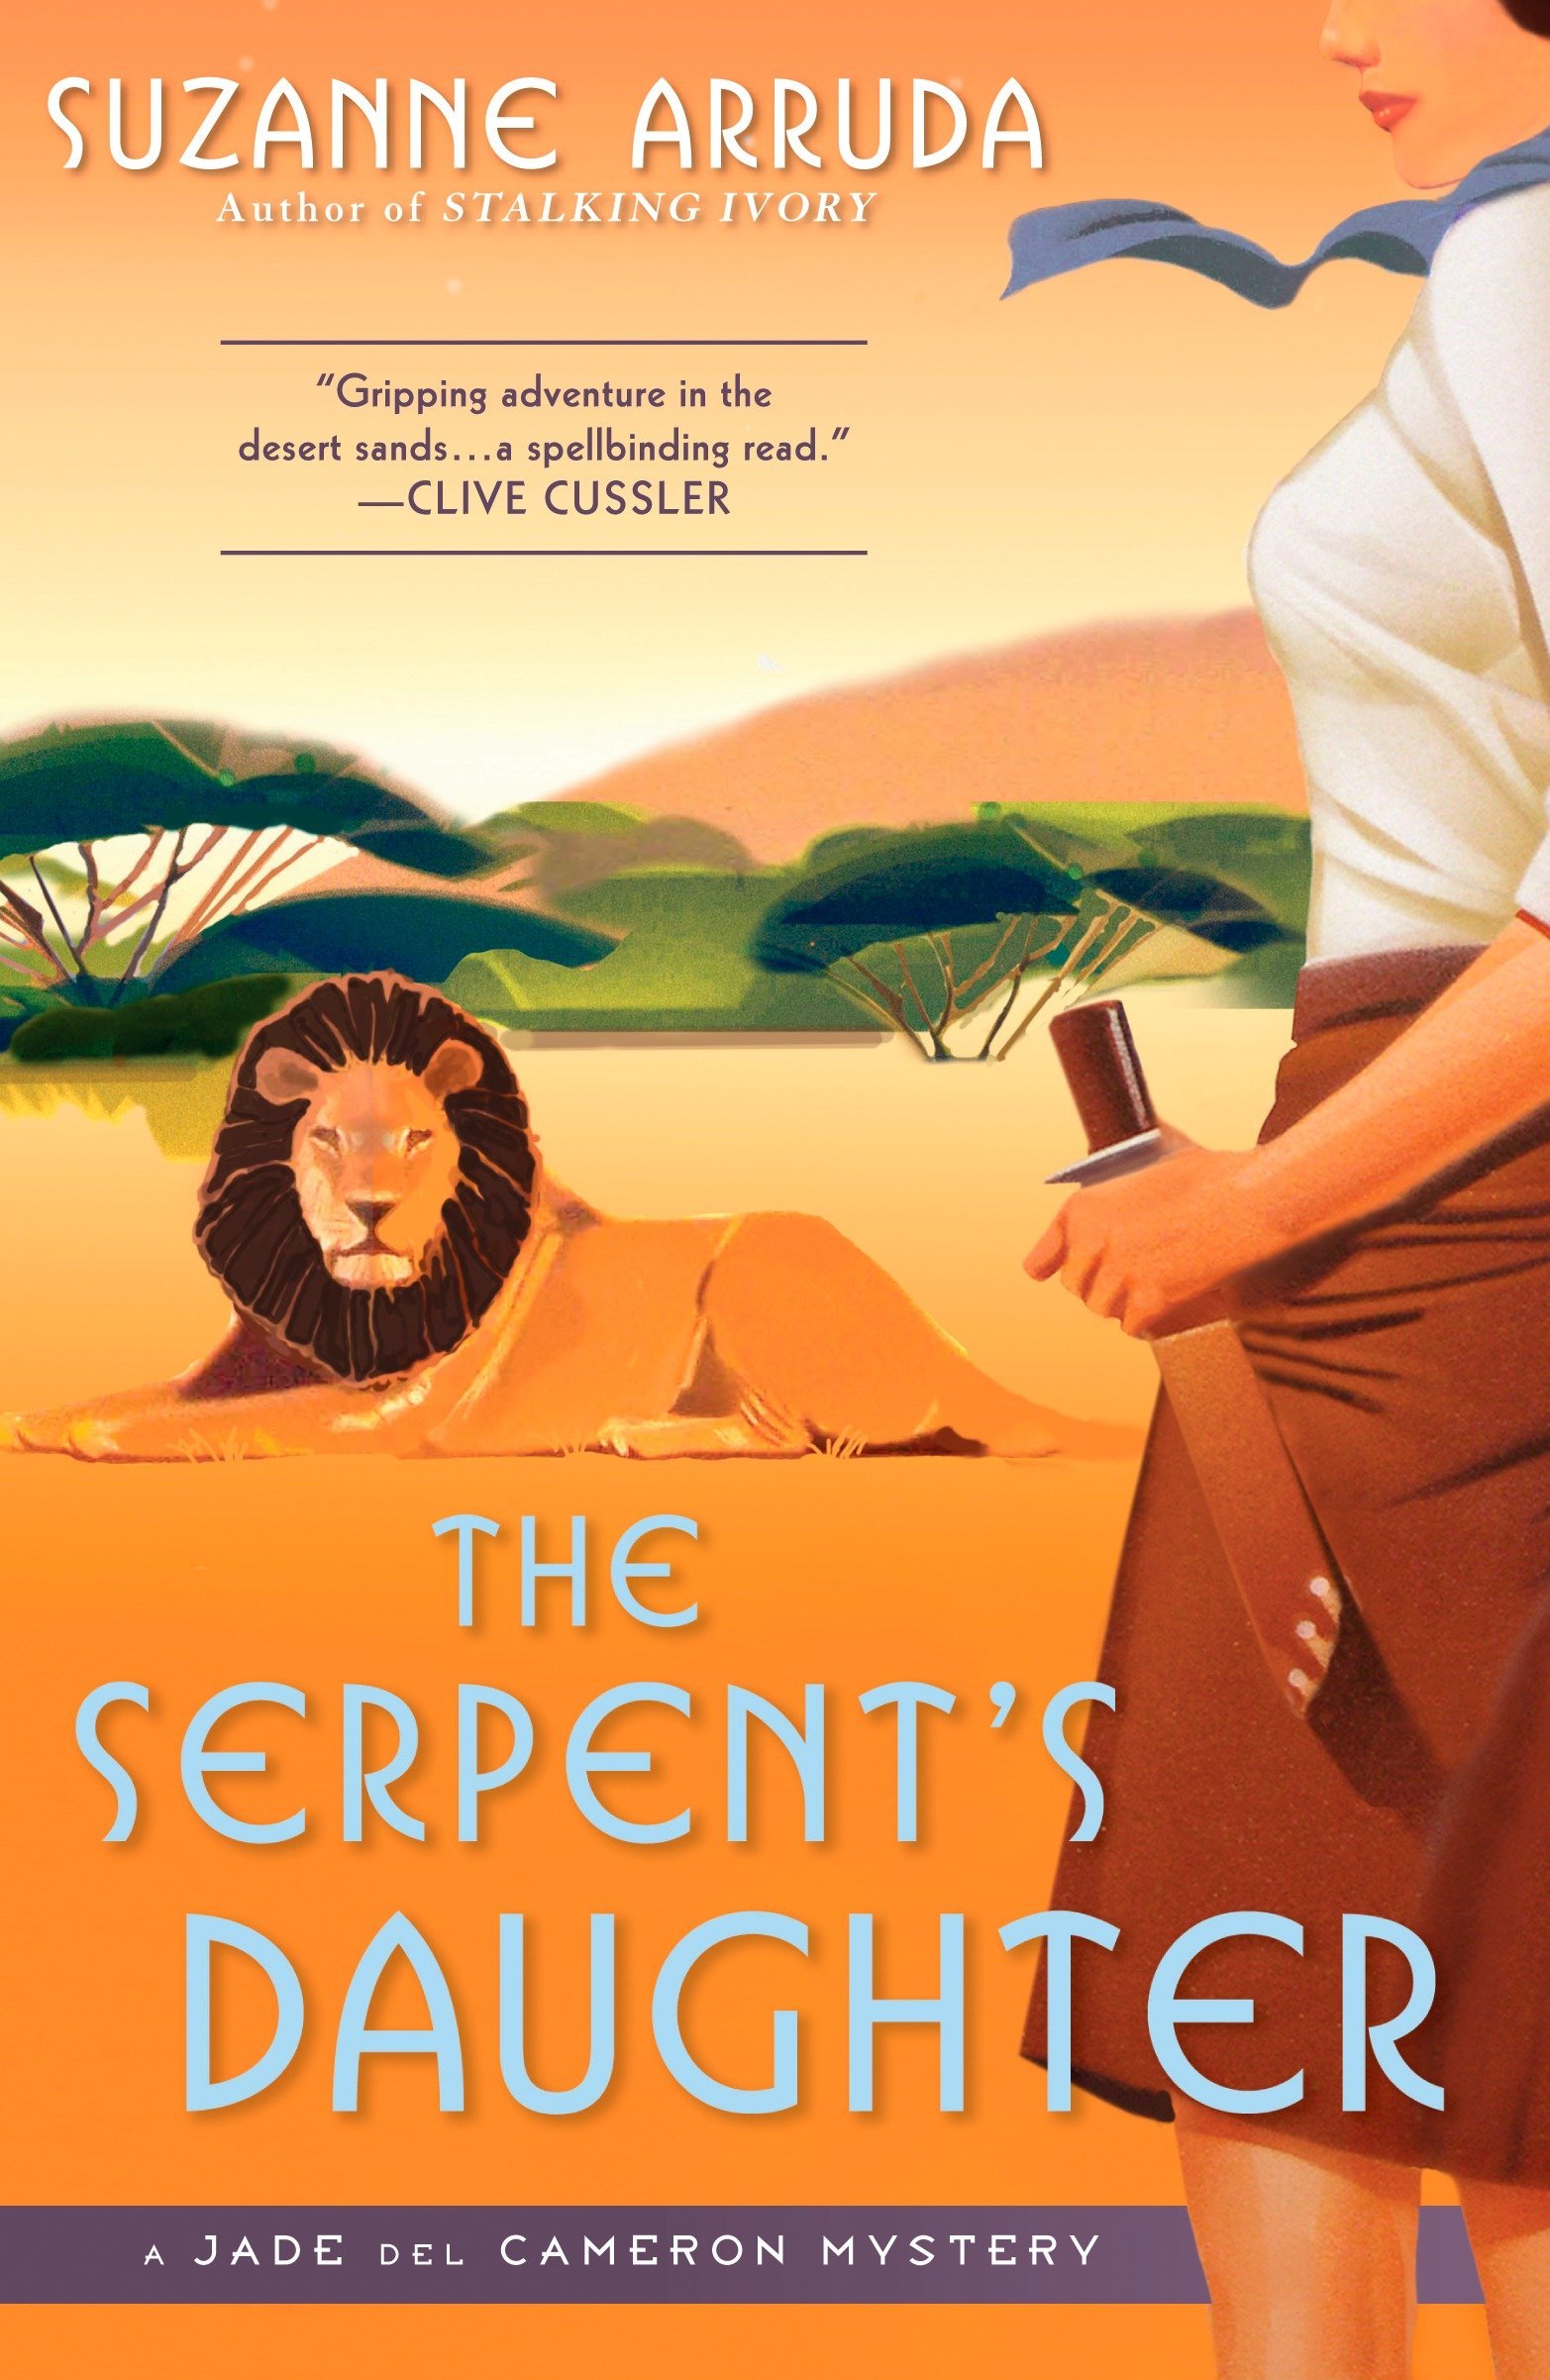 The Serpent's Daughter